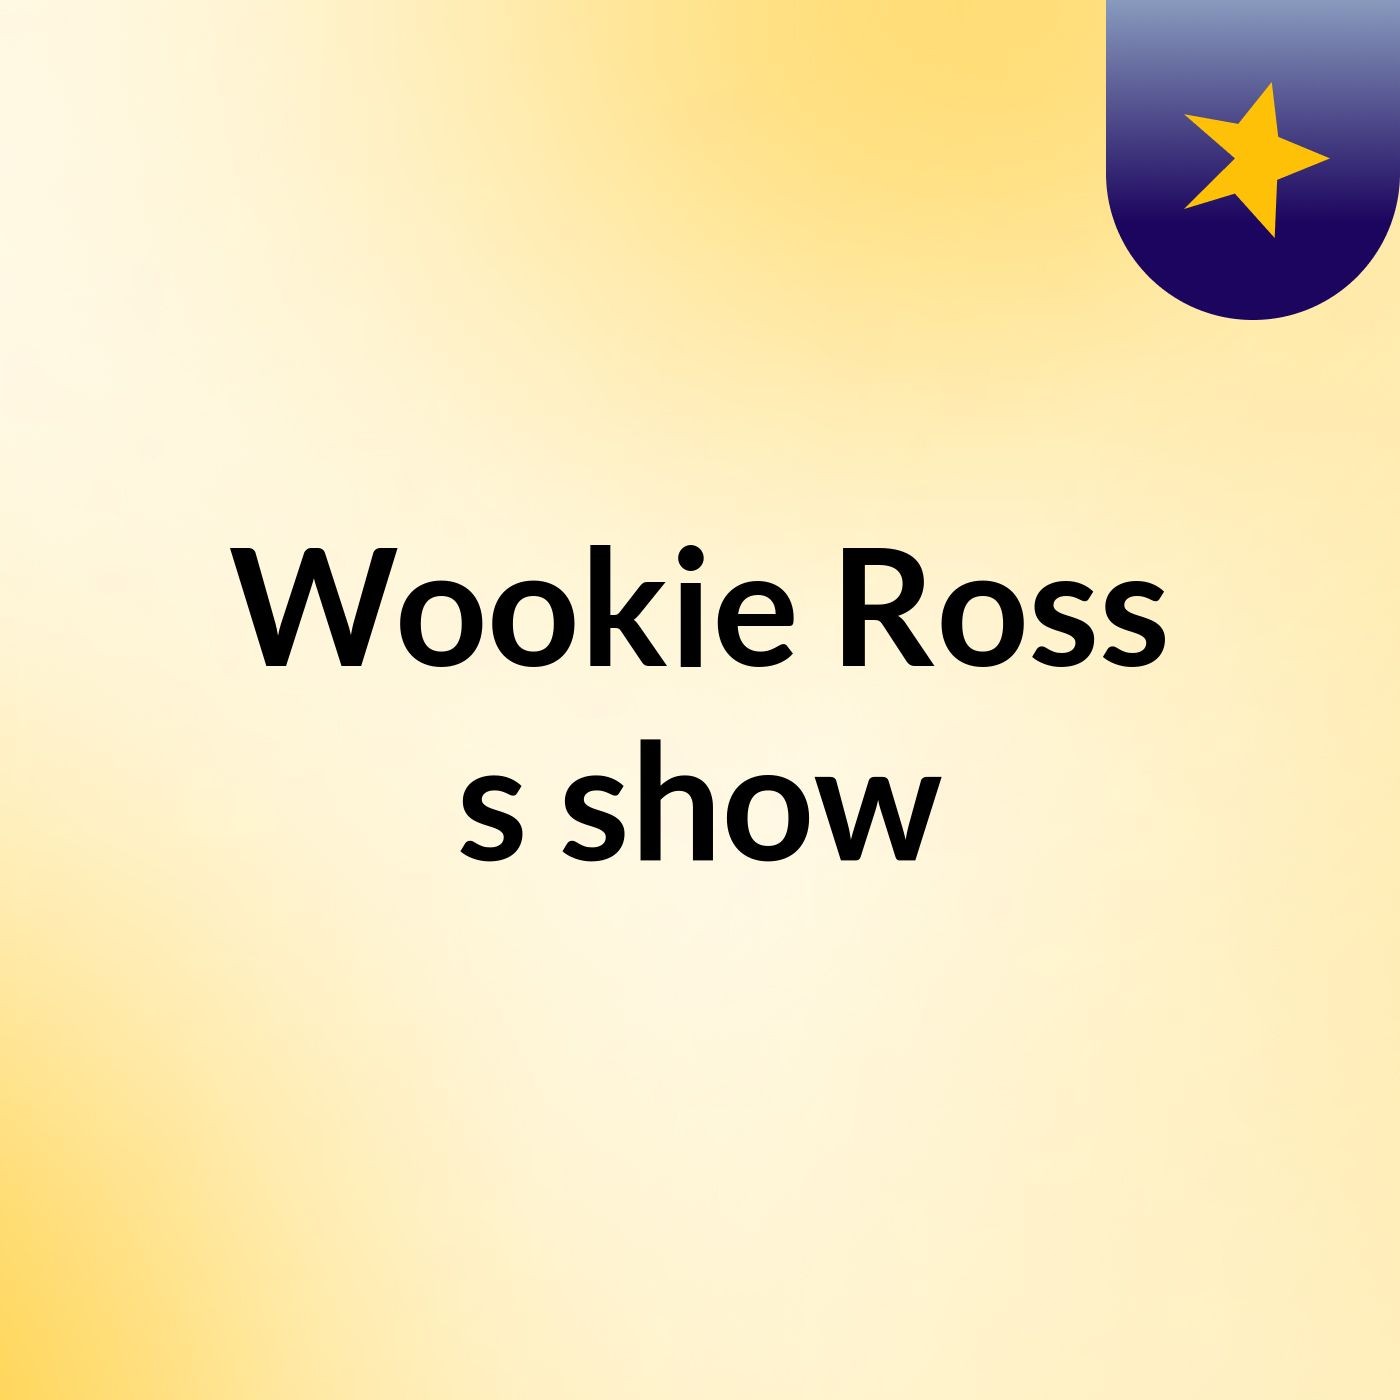 Wookie Ross's show